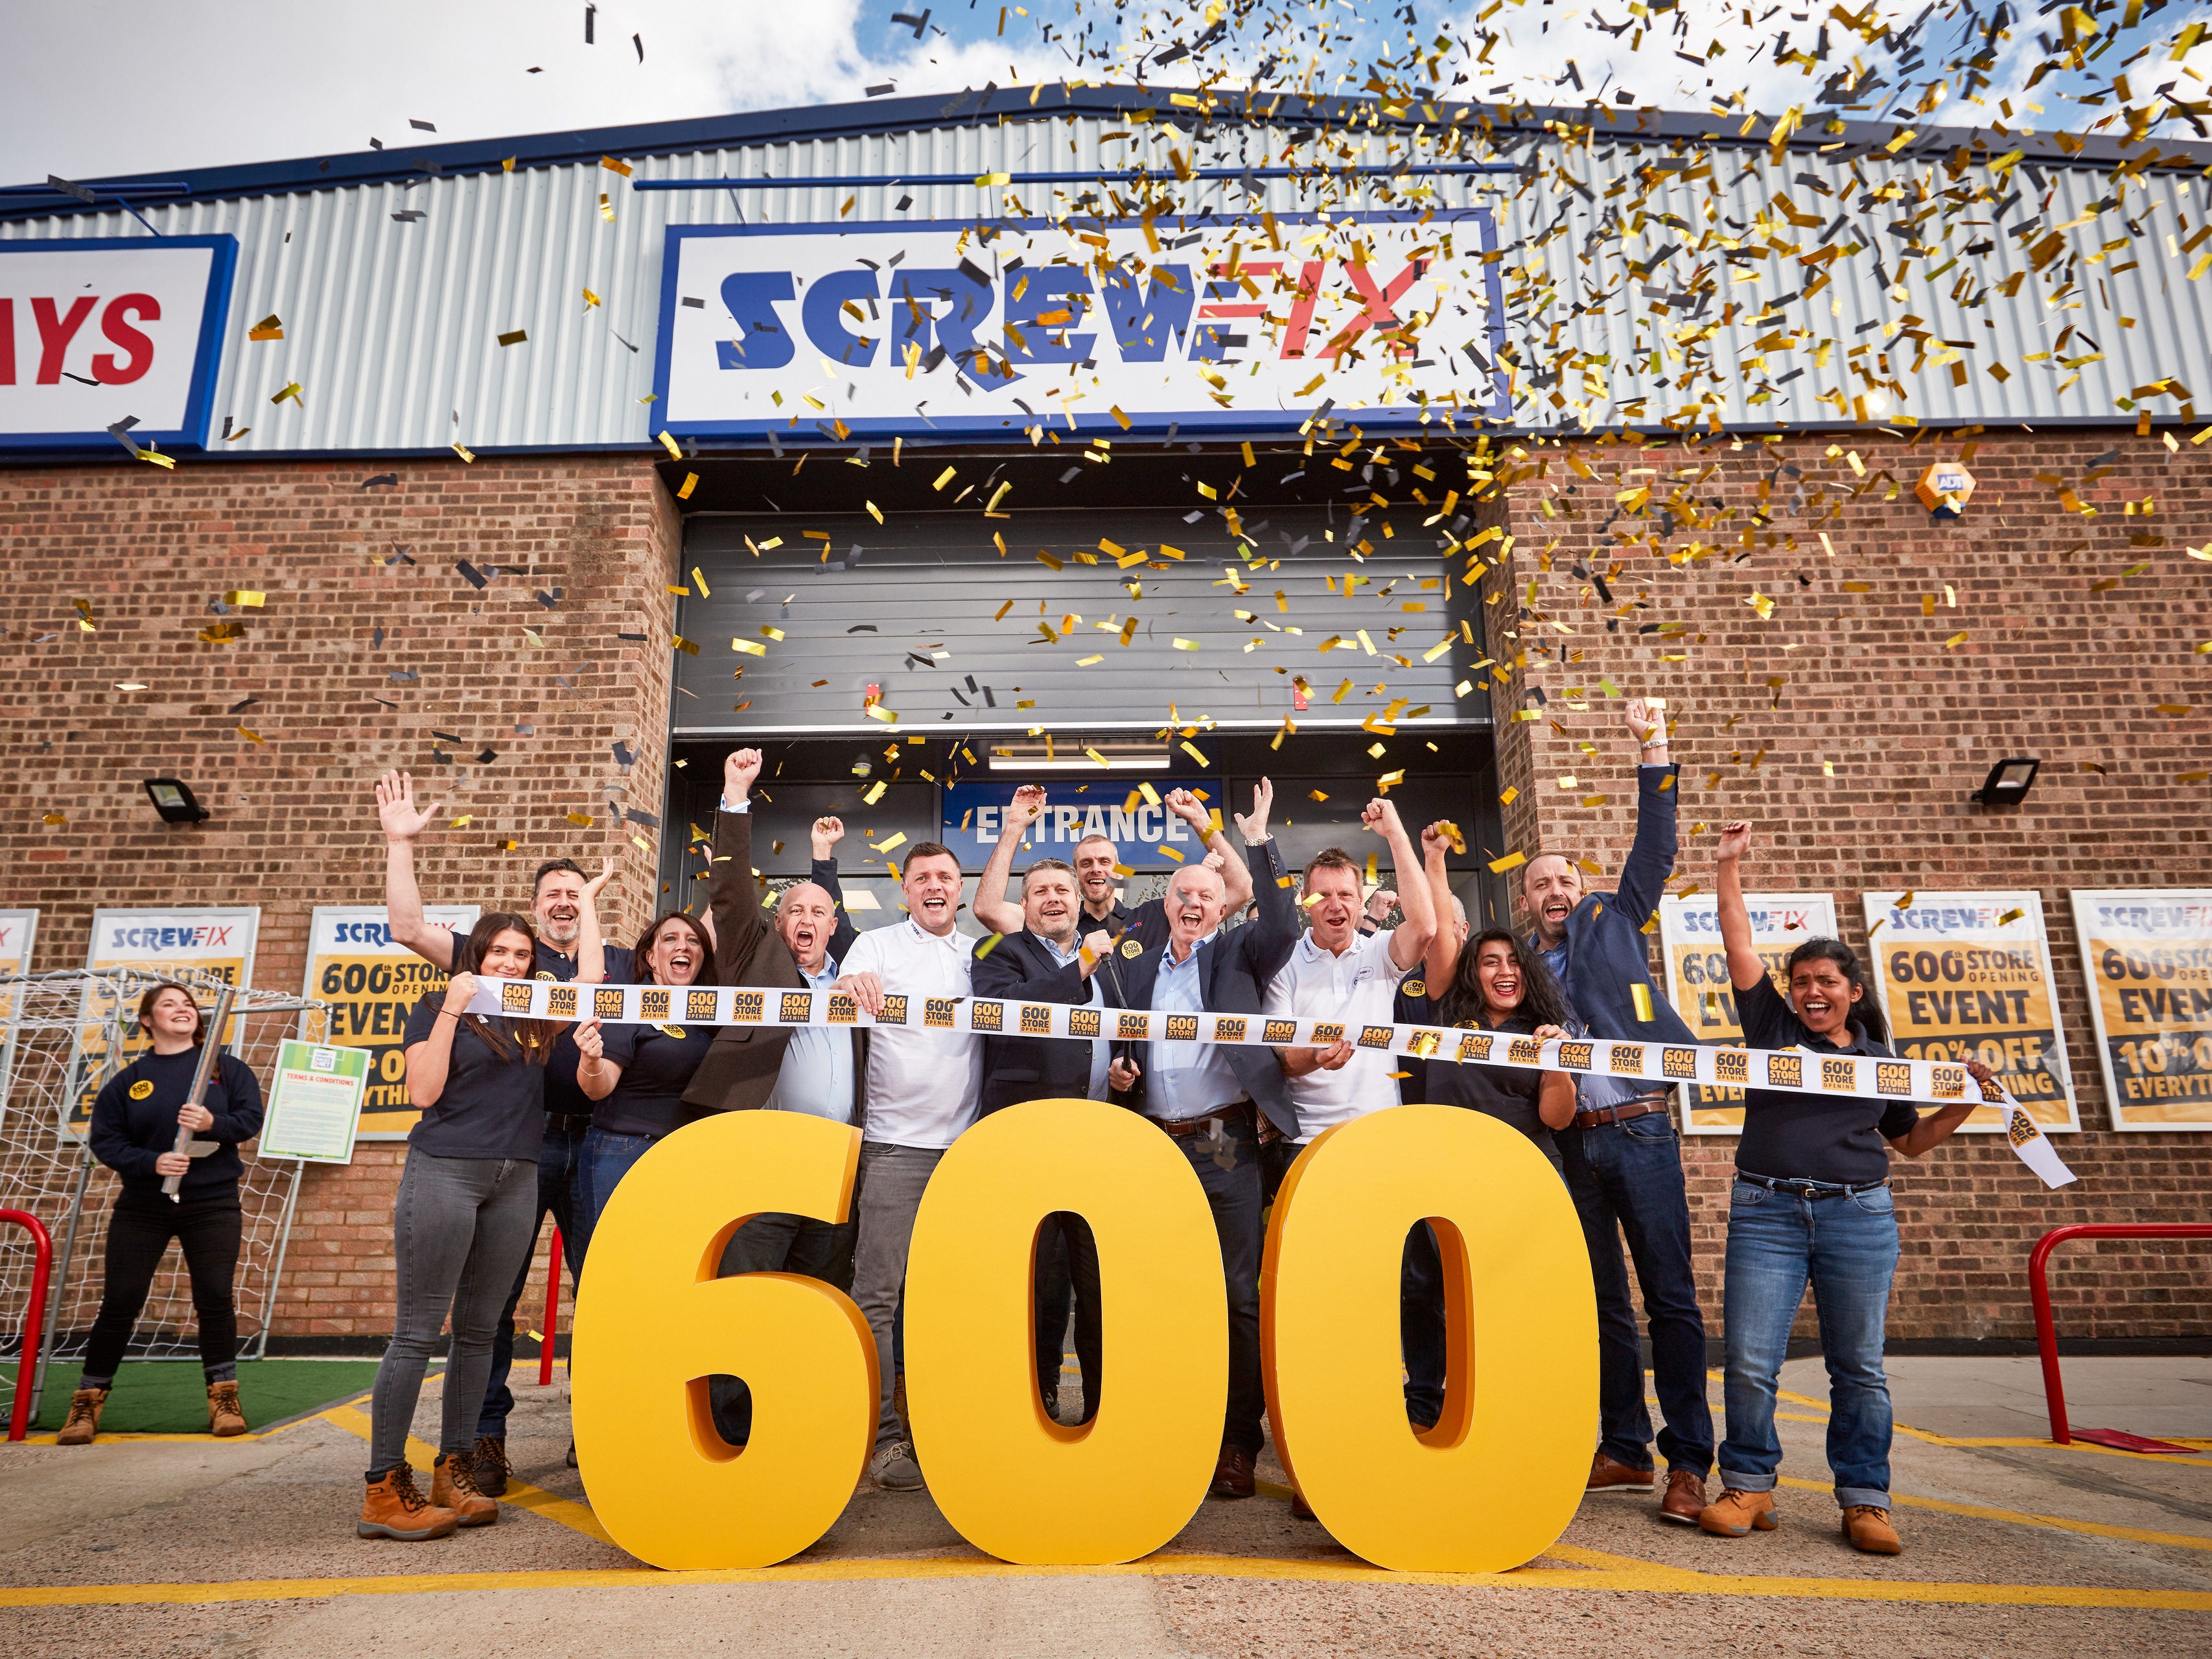 Hoddesdon is Screwfix’s 600th store